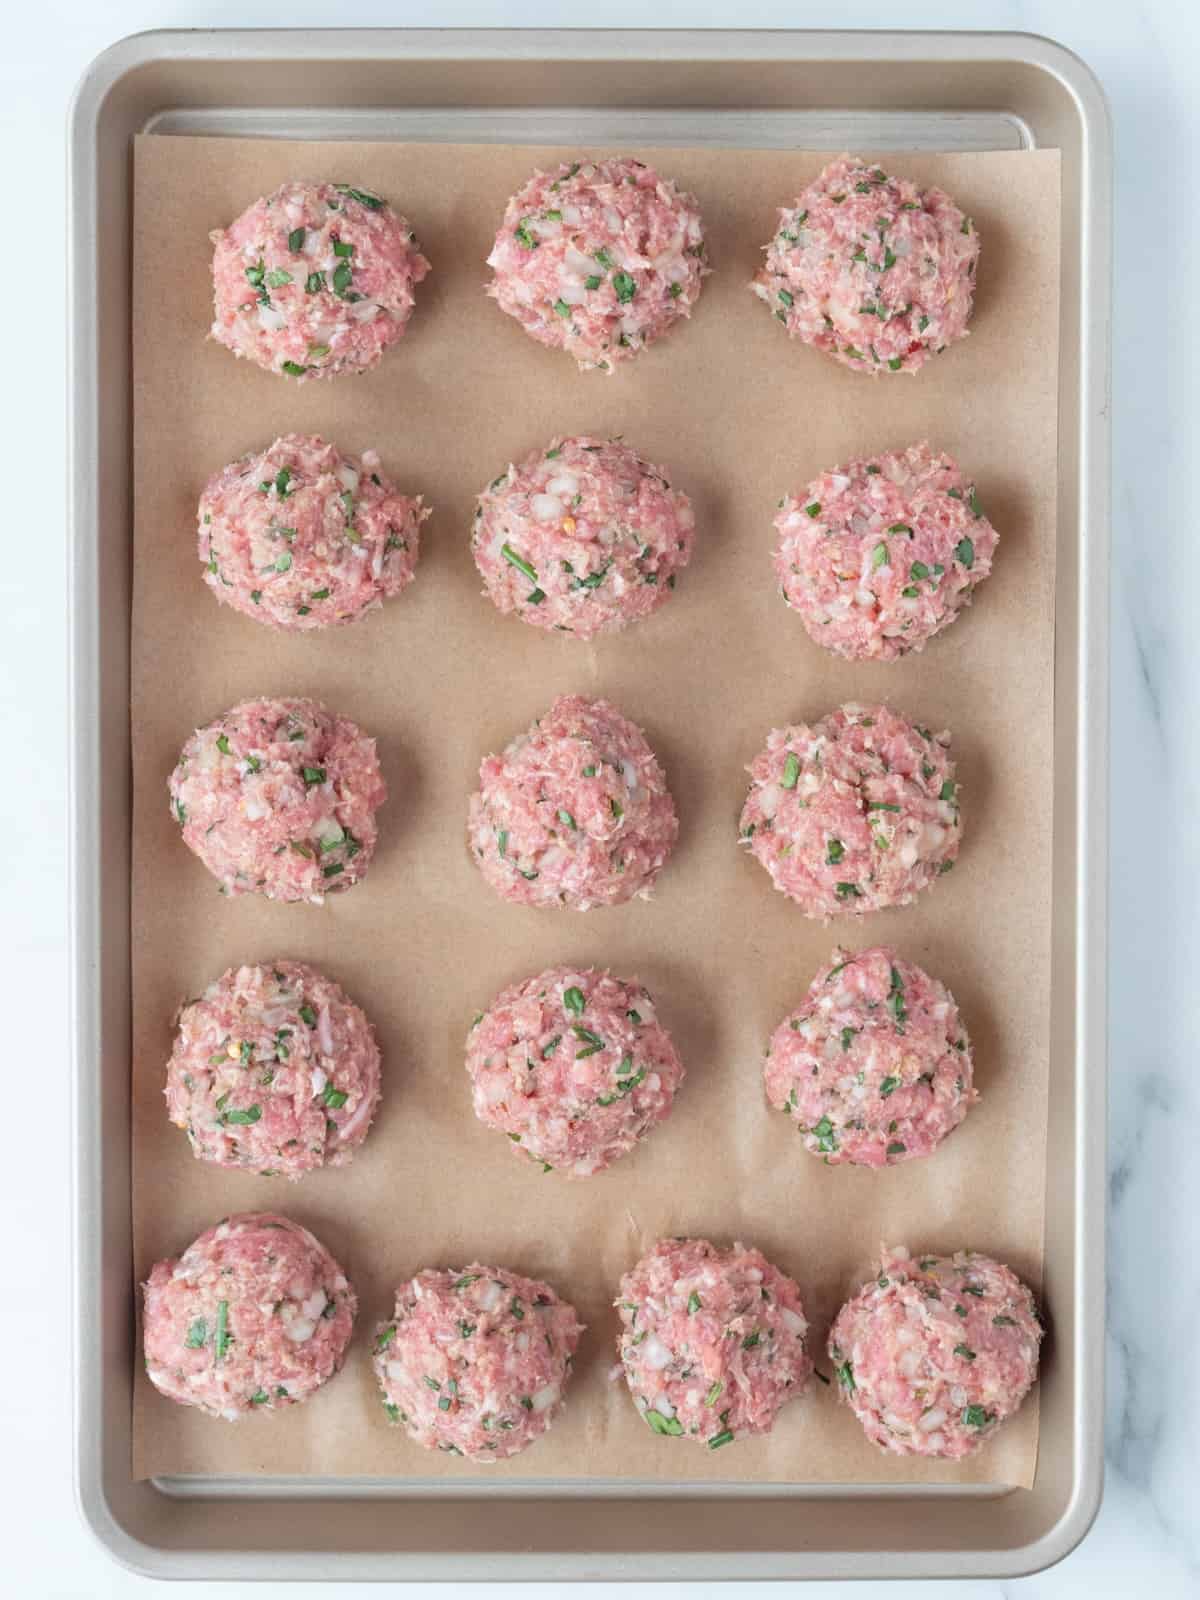 A parchment-lined baking sheet with pork meatballs placed in a 3 by 5 grid, shaped in spheres, ready to be baked.